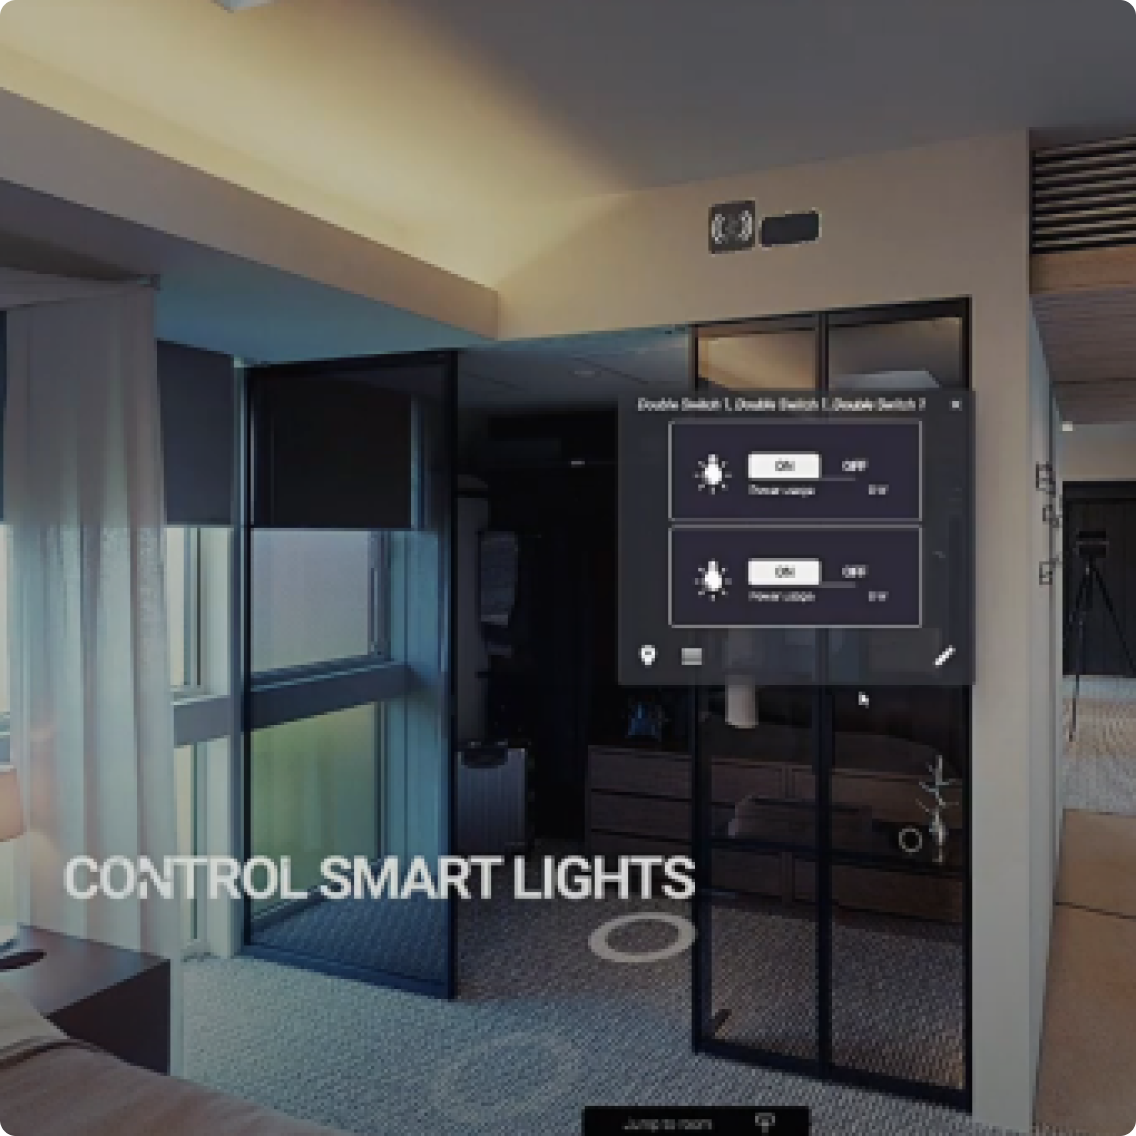 Make Smart Home Installation Easier and Less Expensive